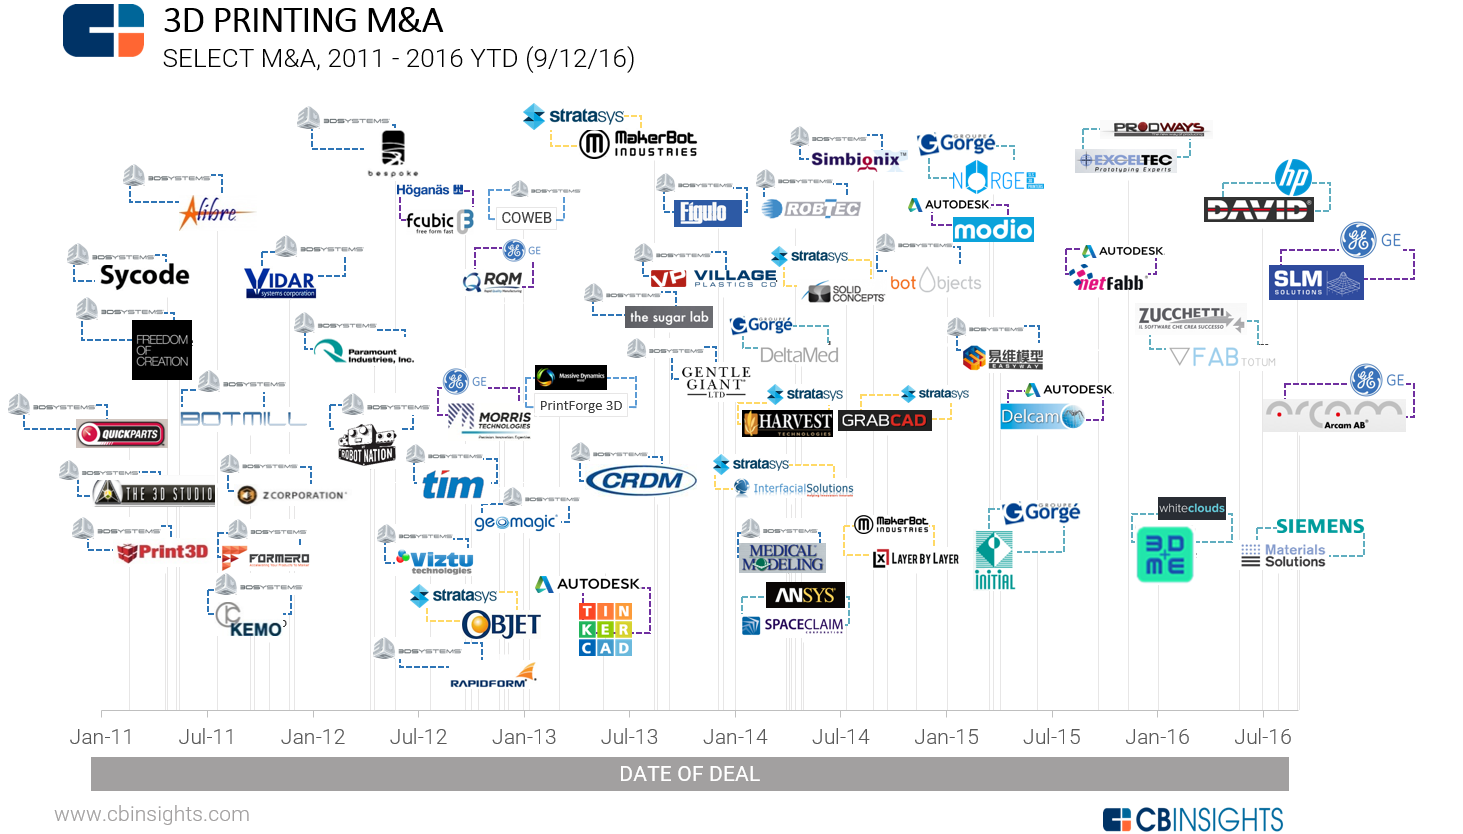  CB Insight's full infographic describing recent 3D printing corporate acquisitions 